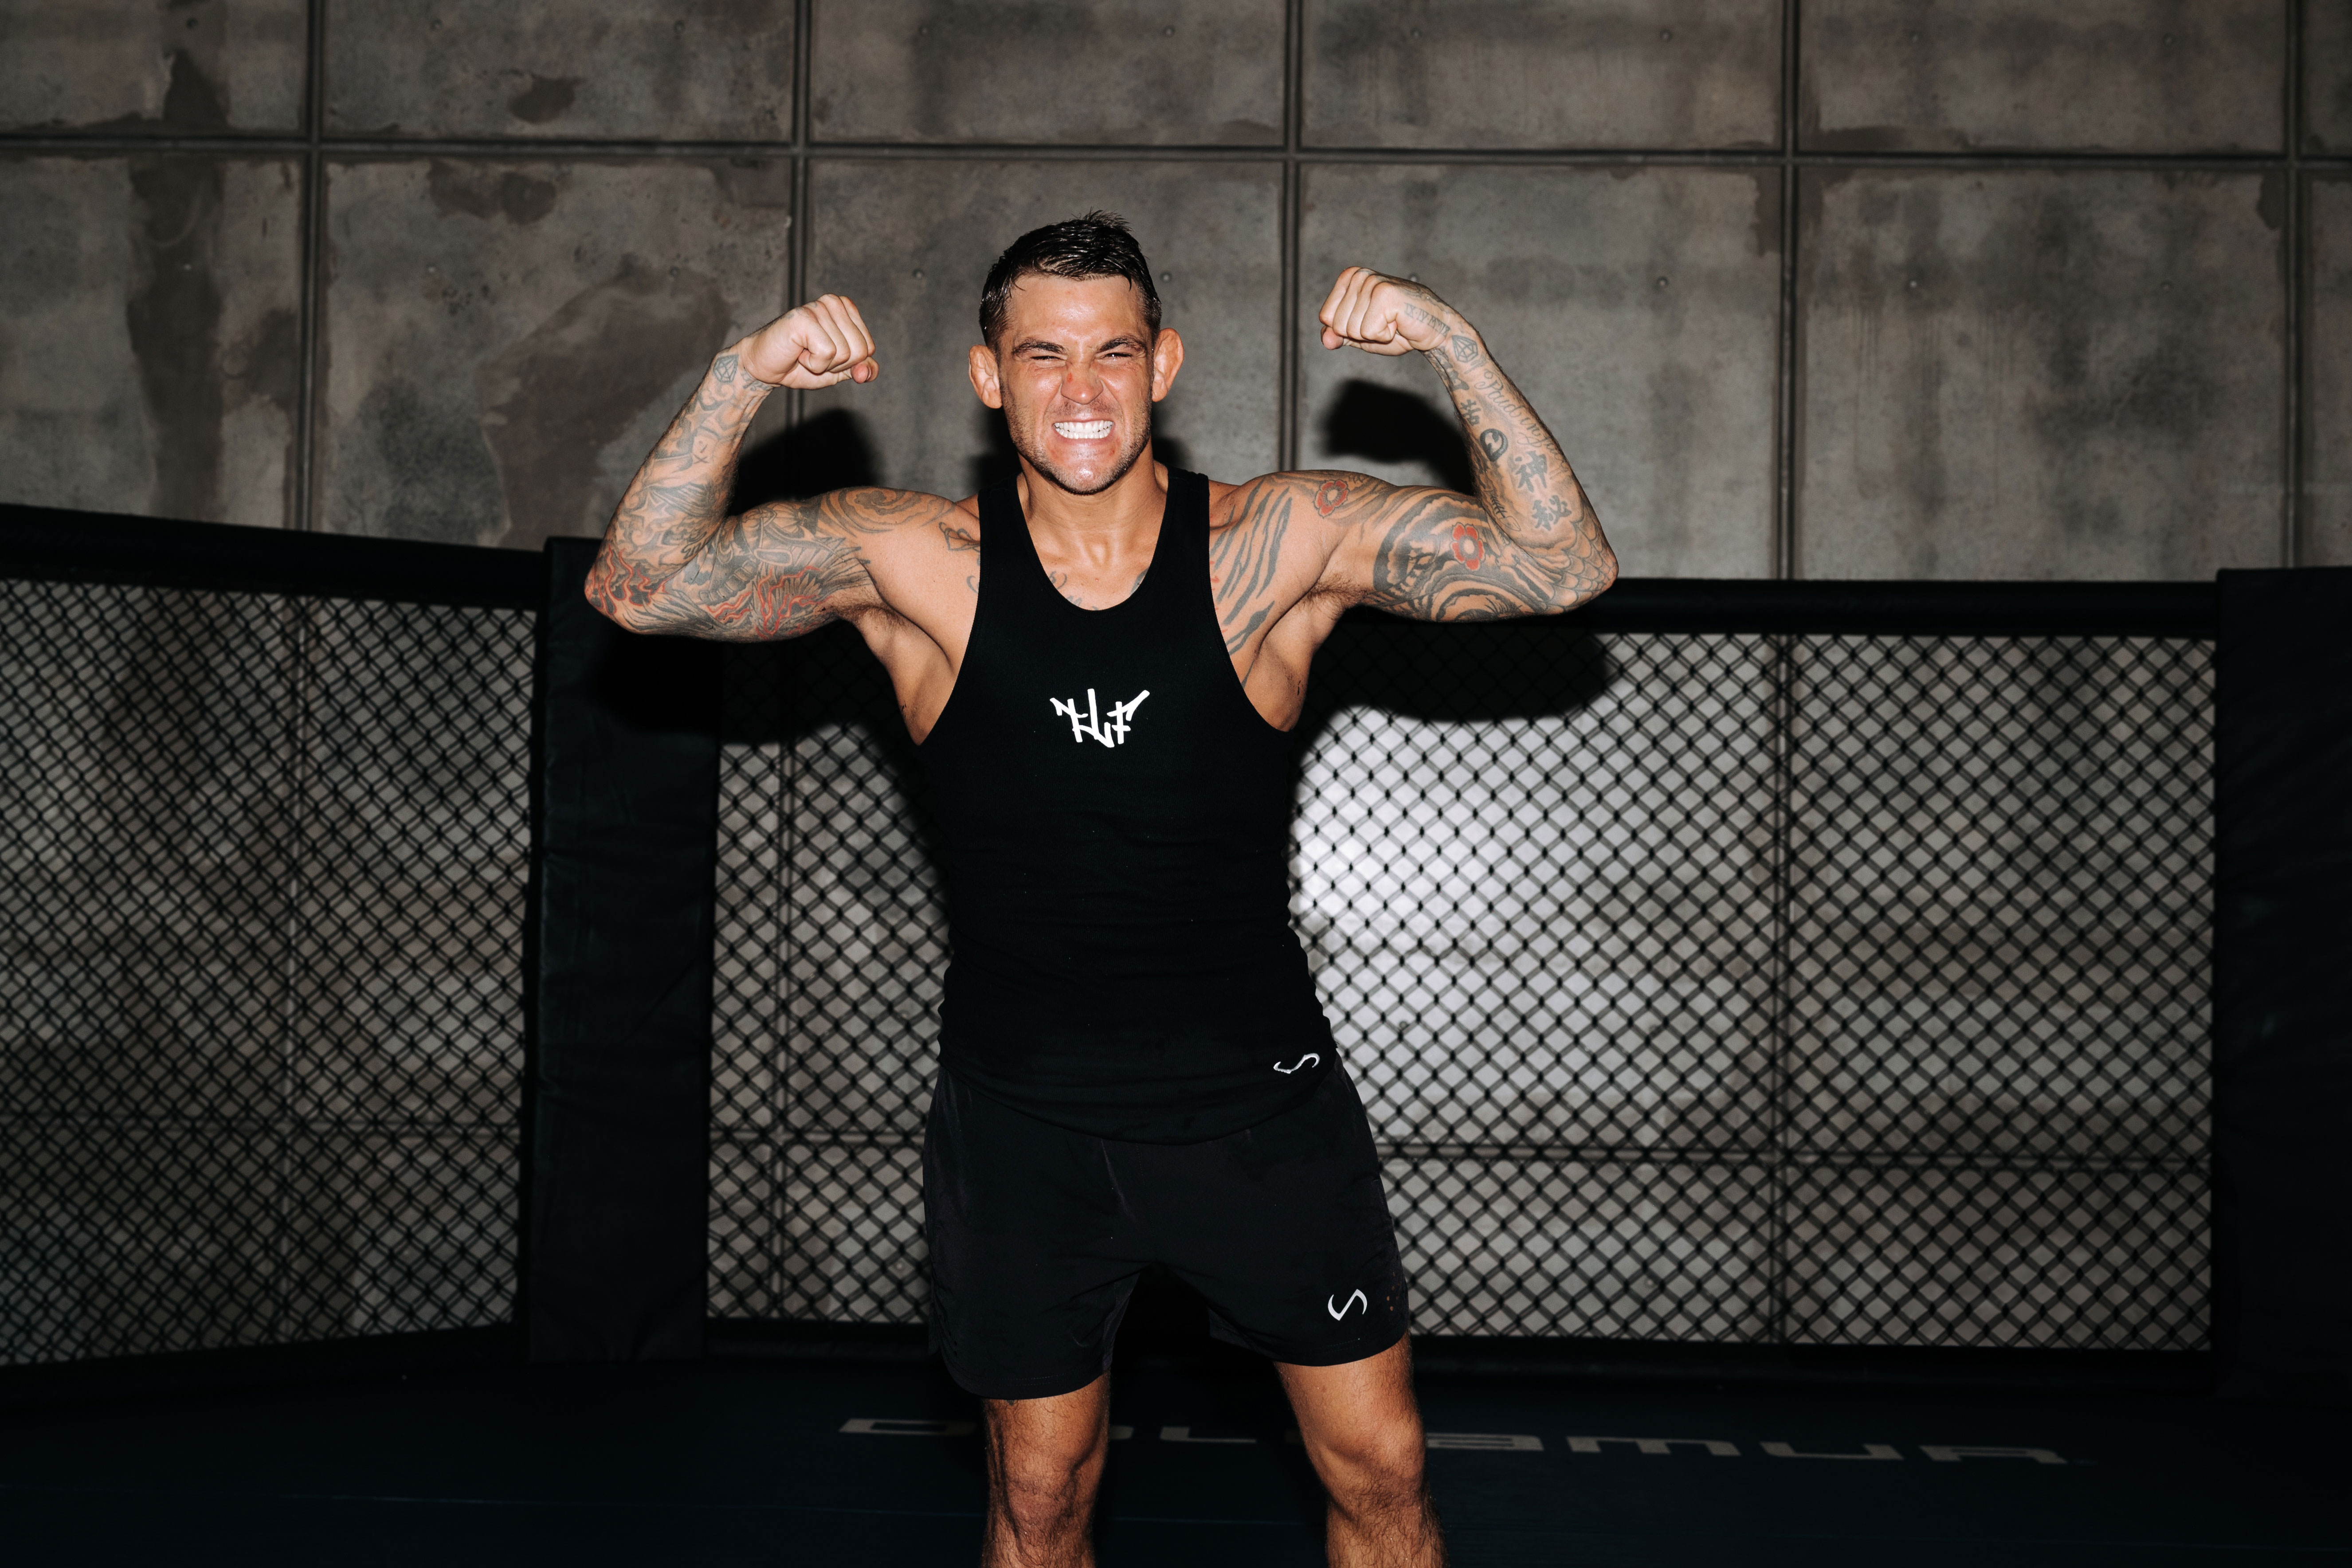 UFC's Dustin Poirier Training Tips To Get To The Top - Muscle & Fitness